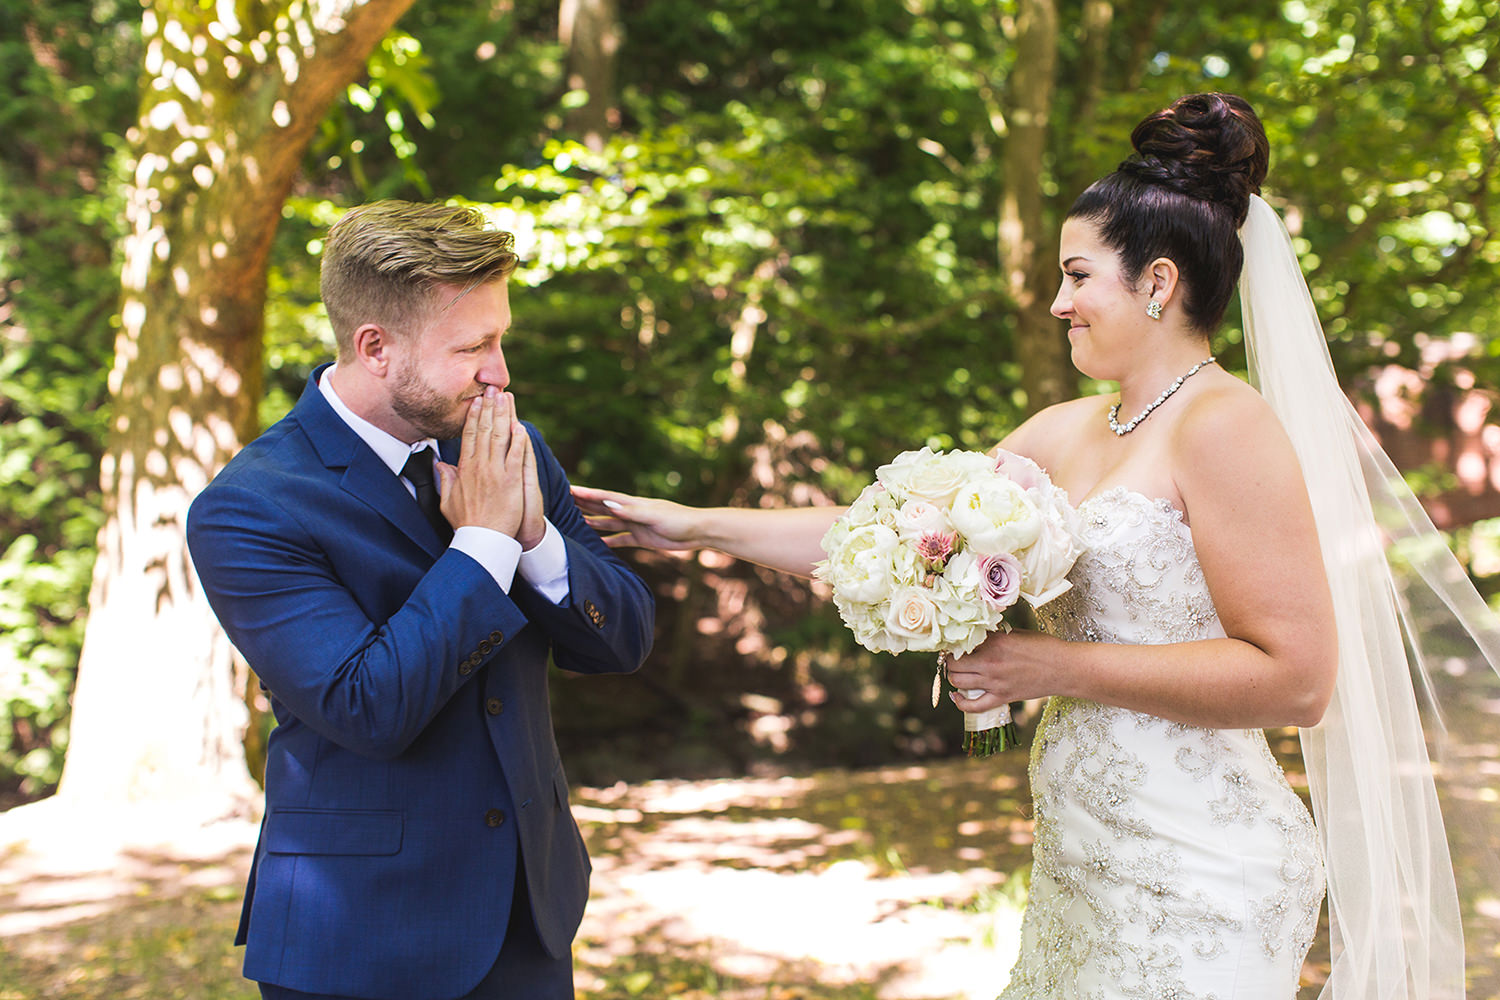 First look for a wedding at Deer Lake Park in Burnaby